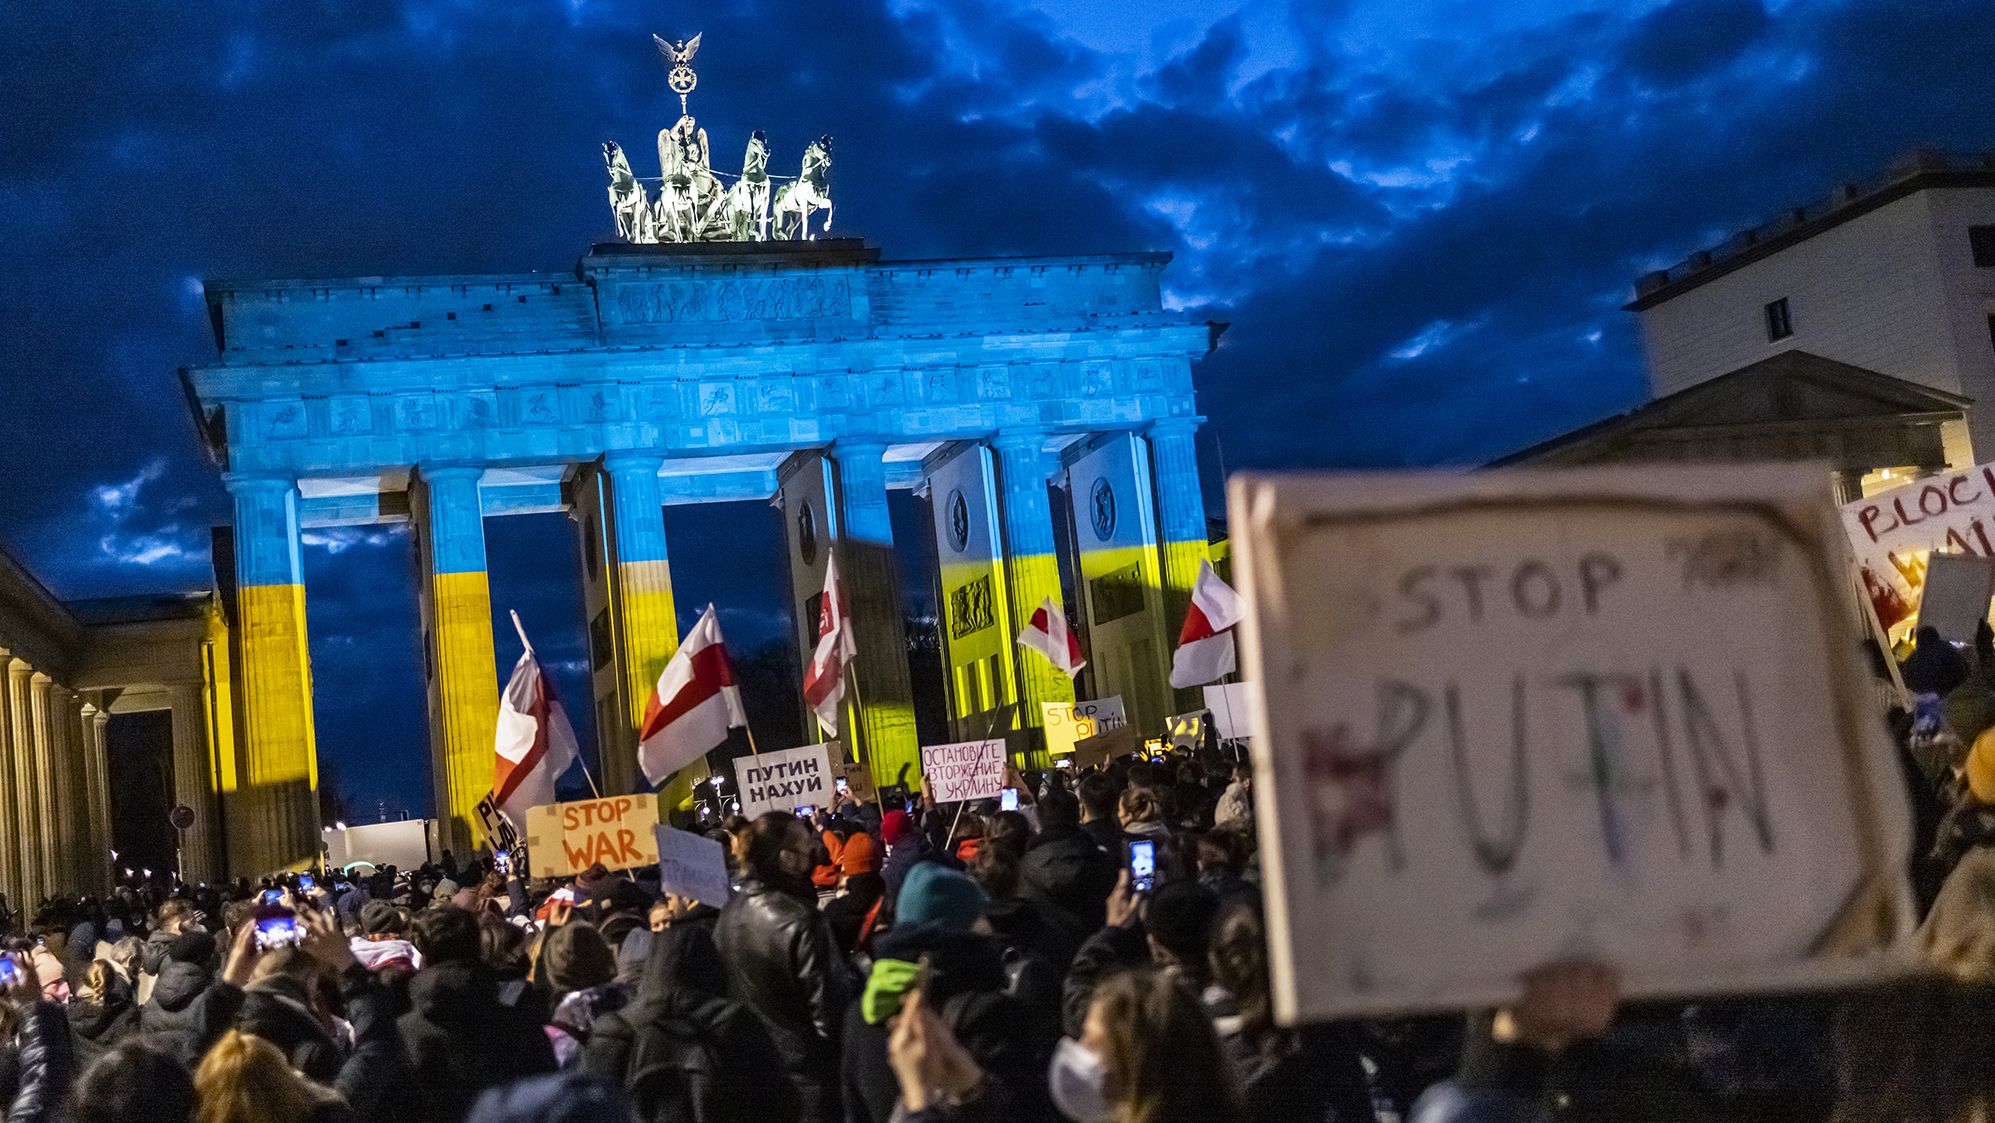 People protest in front of the Brandenburg Gate in Berlin on February 24.